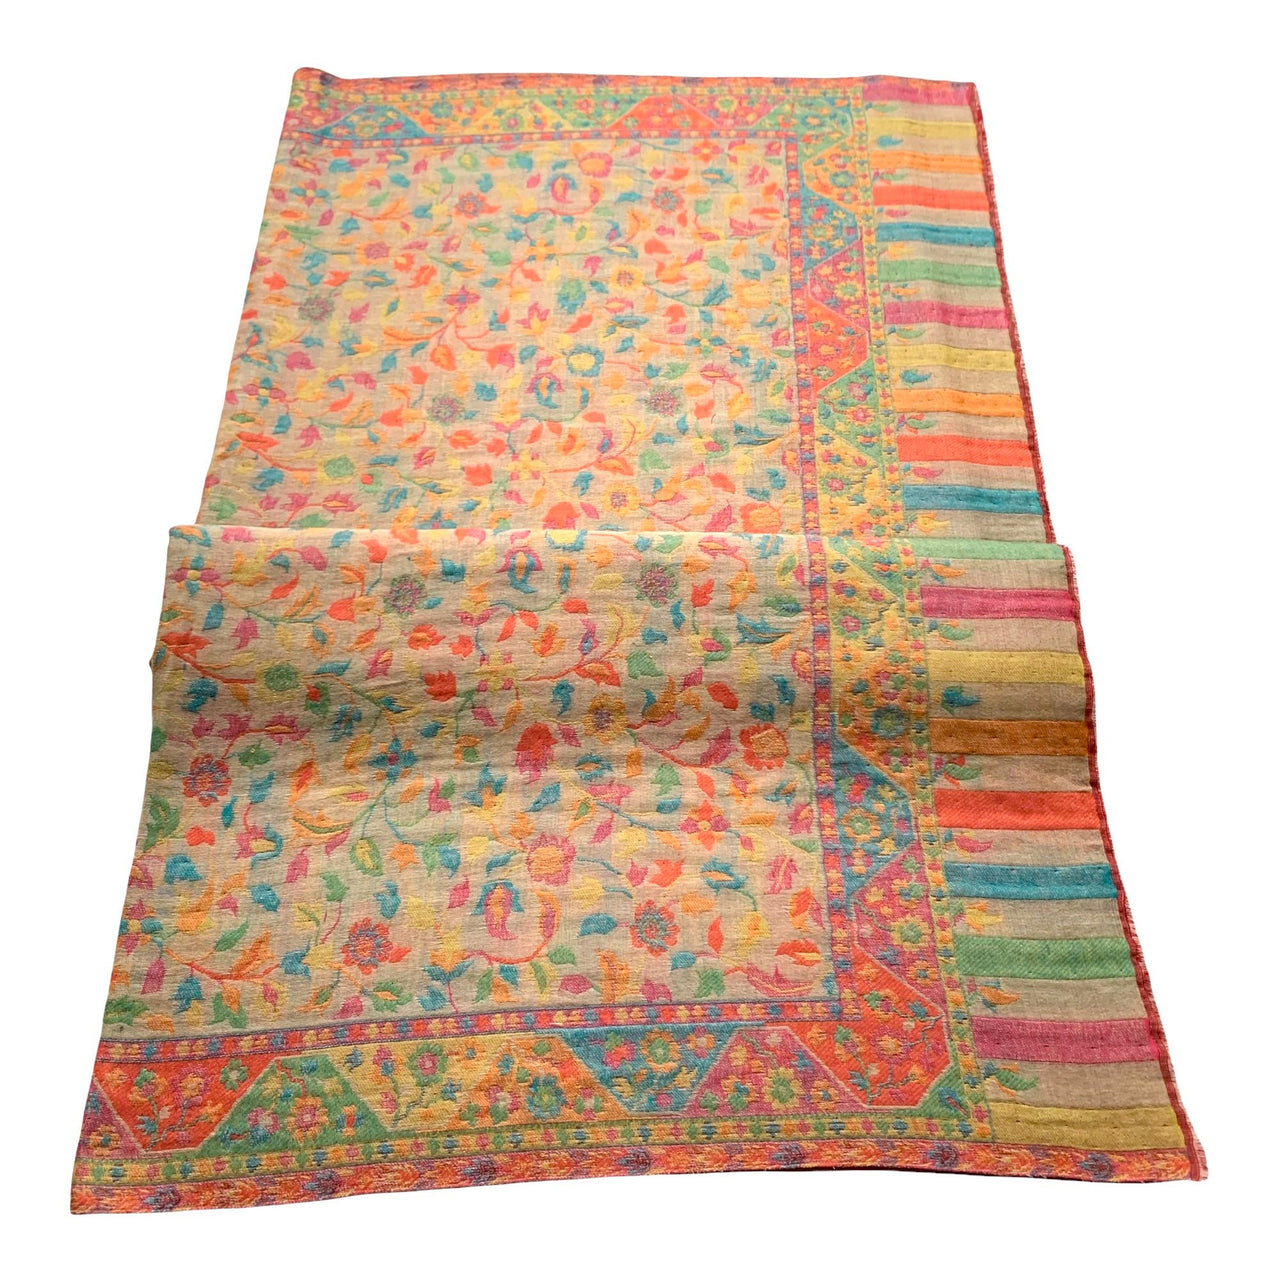 Stunning Paisley floral Wool Shawl Multicoloured  Scarf Wrap